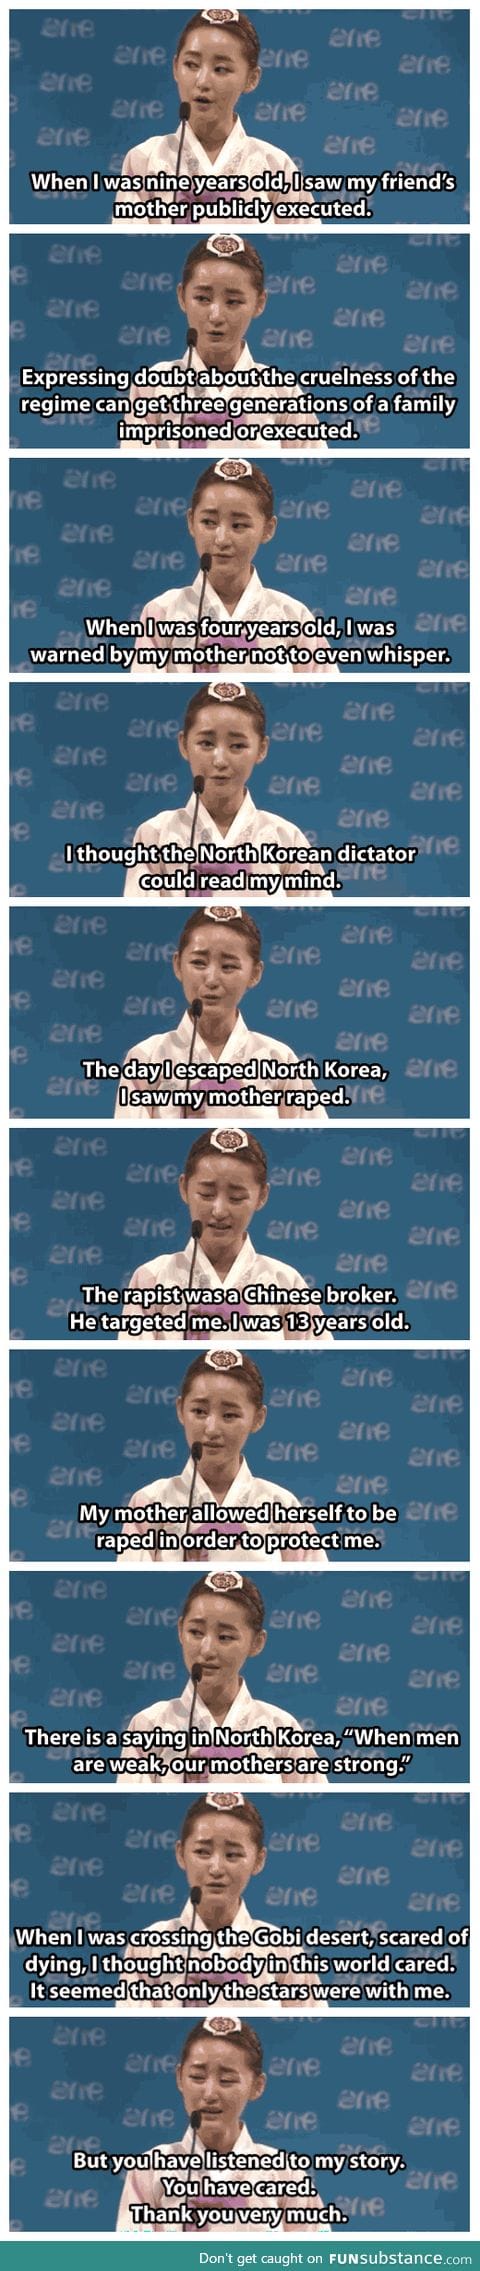 Girl escapes from North Korea